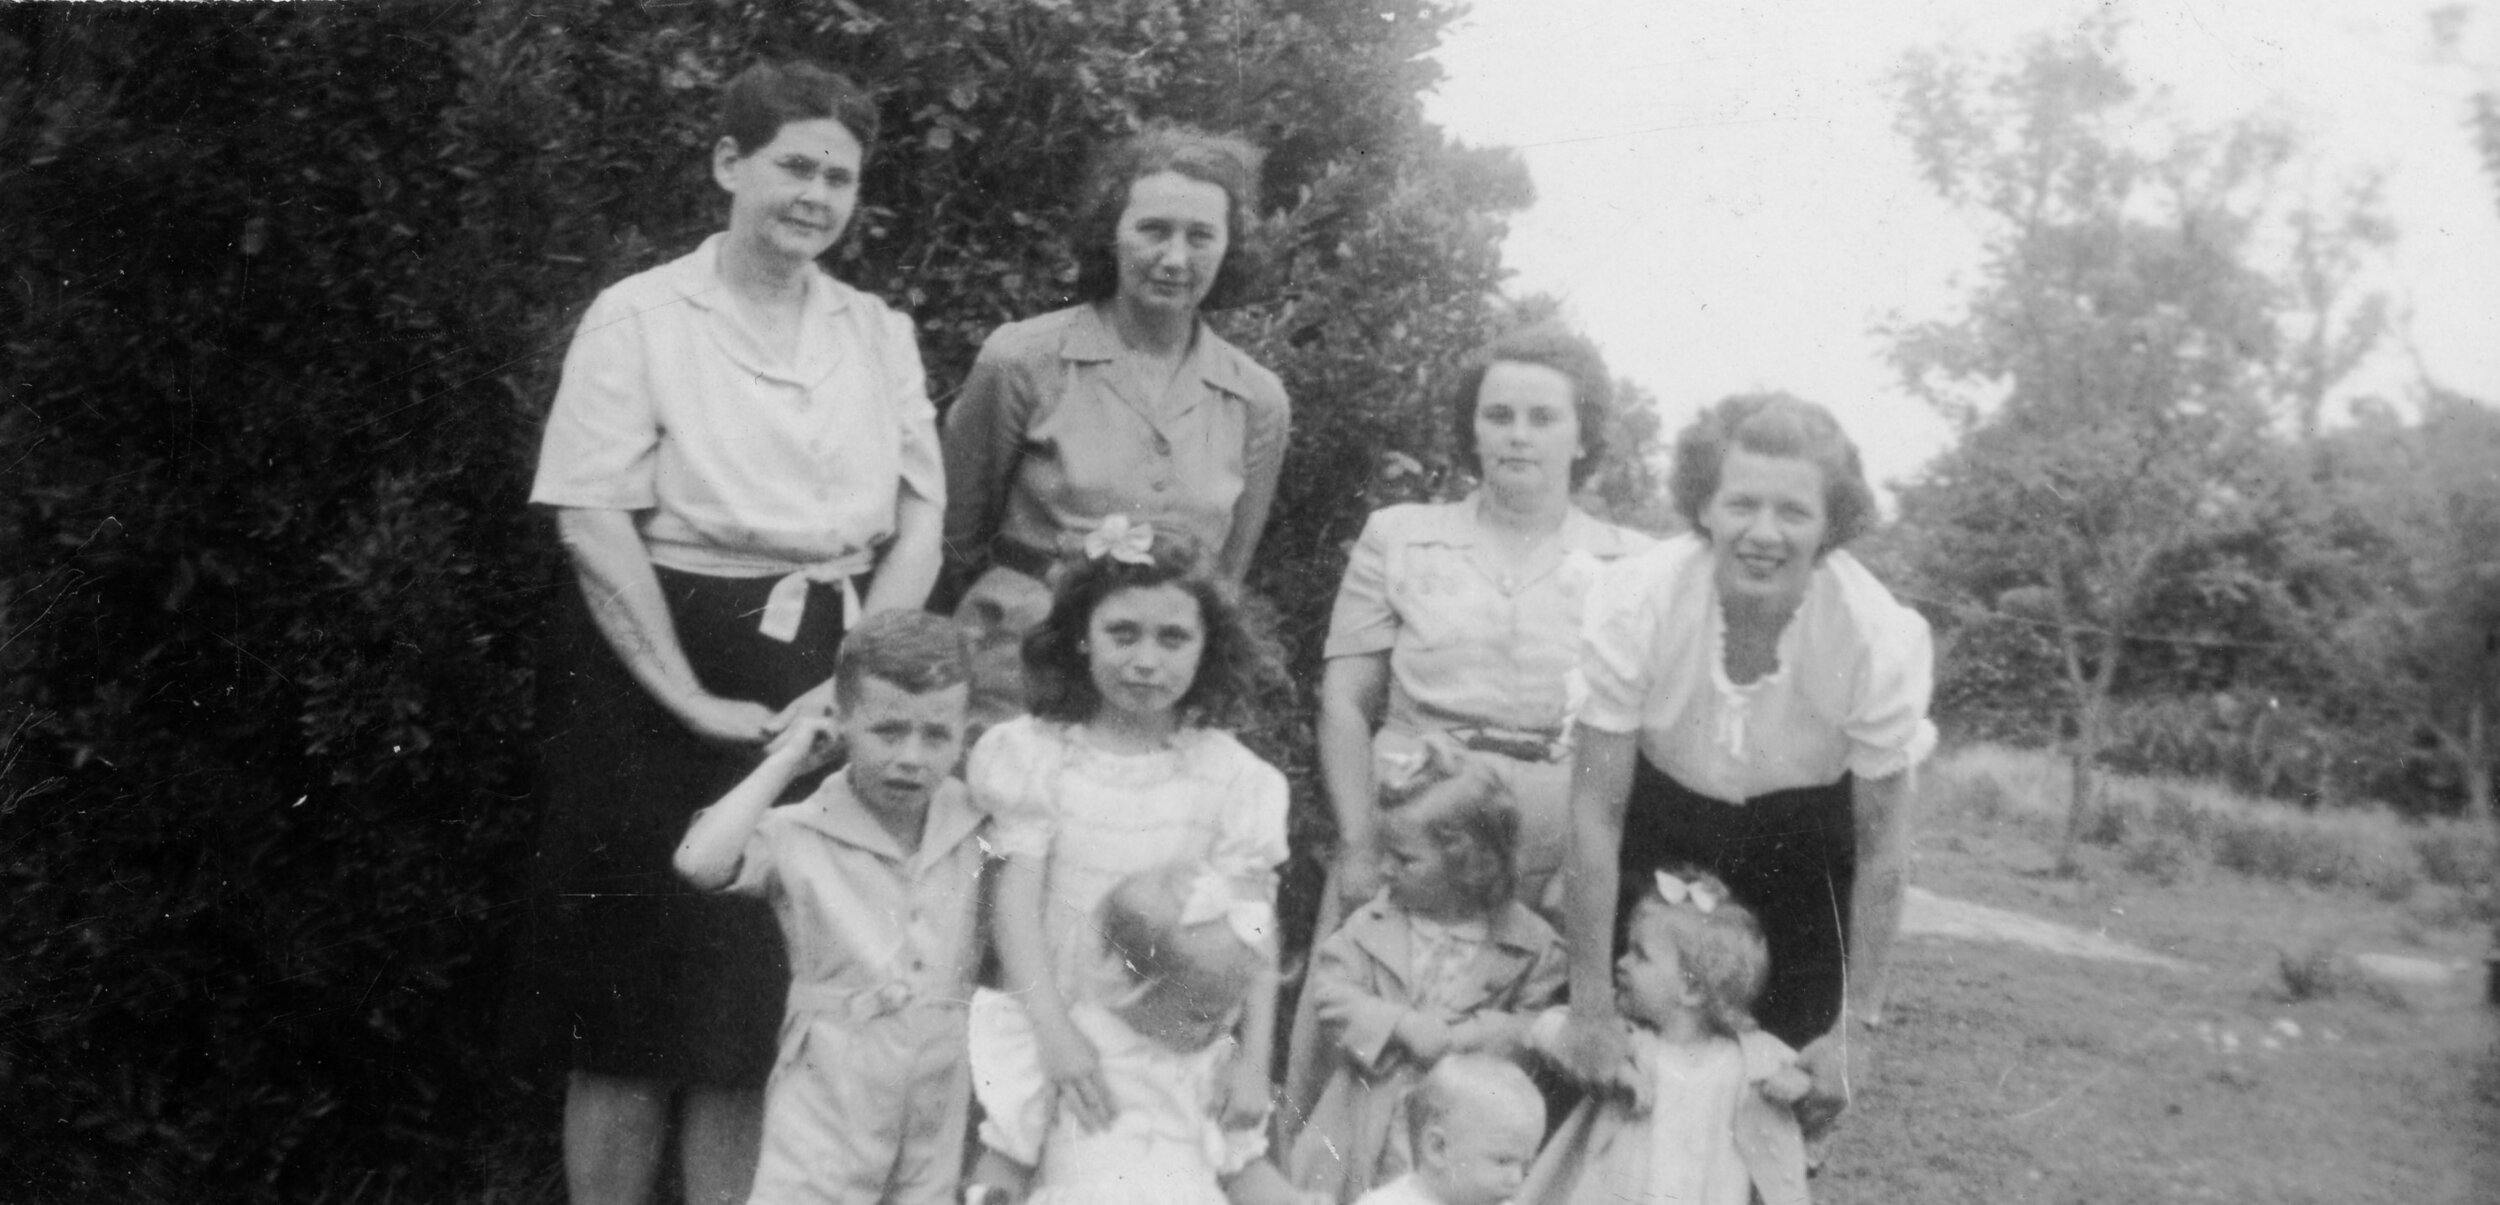  Standing: Myrtle Chadwick, Virgie Chadwick Davis, Thelma Whitehurst (later married Harvey Chadwick), Frances Watson. Middle Row: Jerry Whitehurst and Jeanette Whitehurst (two children of Gerald and Mae Whitehurst), Patricia Davis (Daughter of Virgie